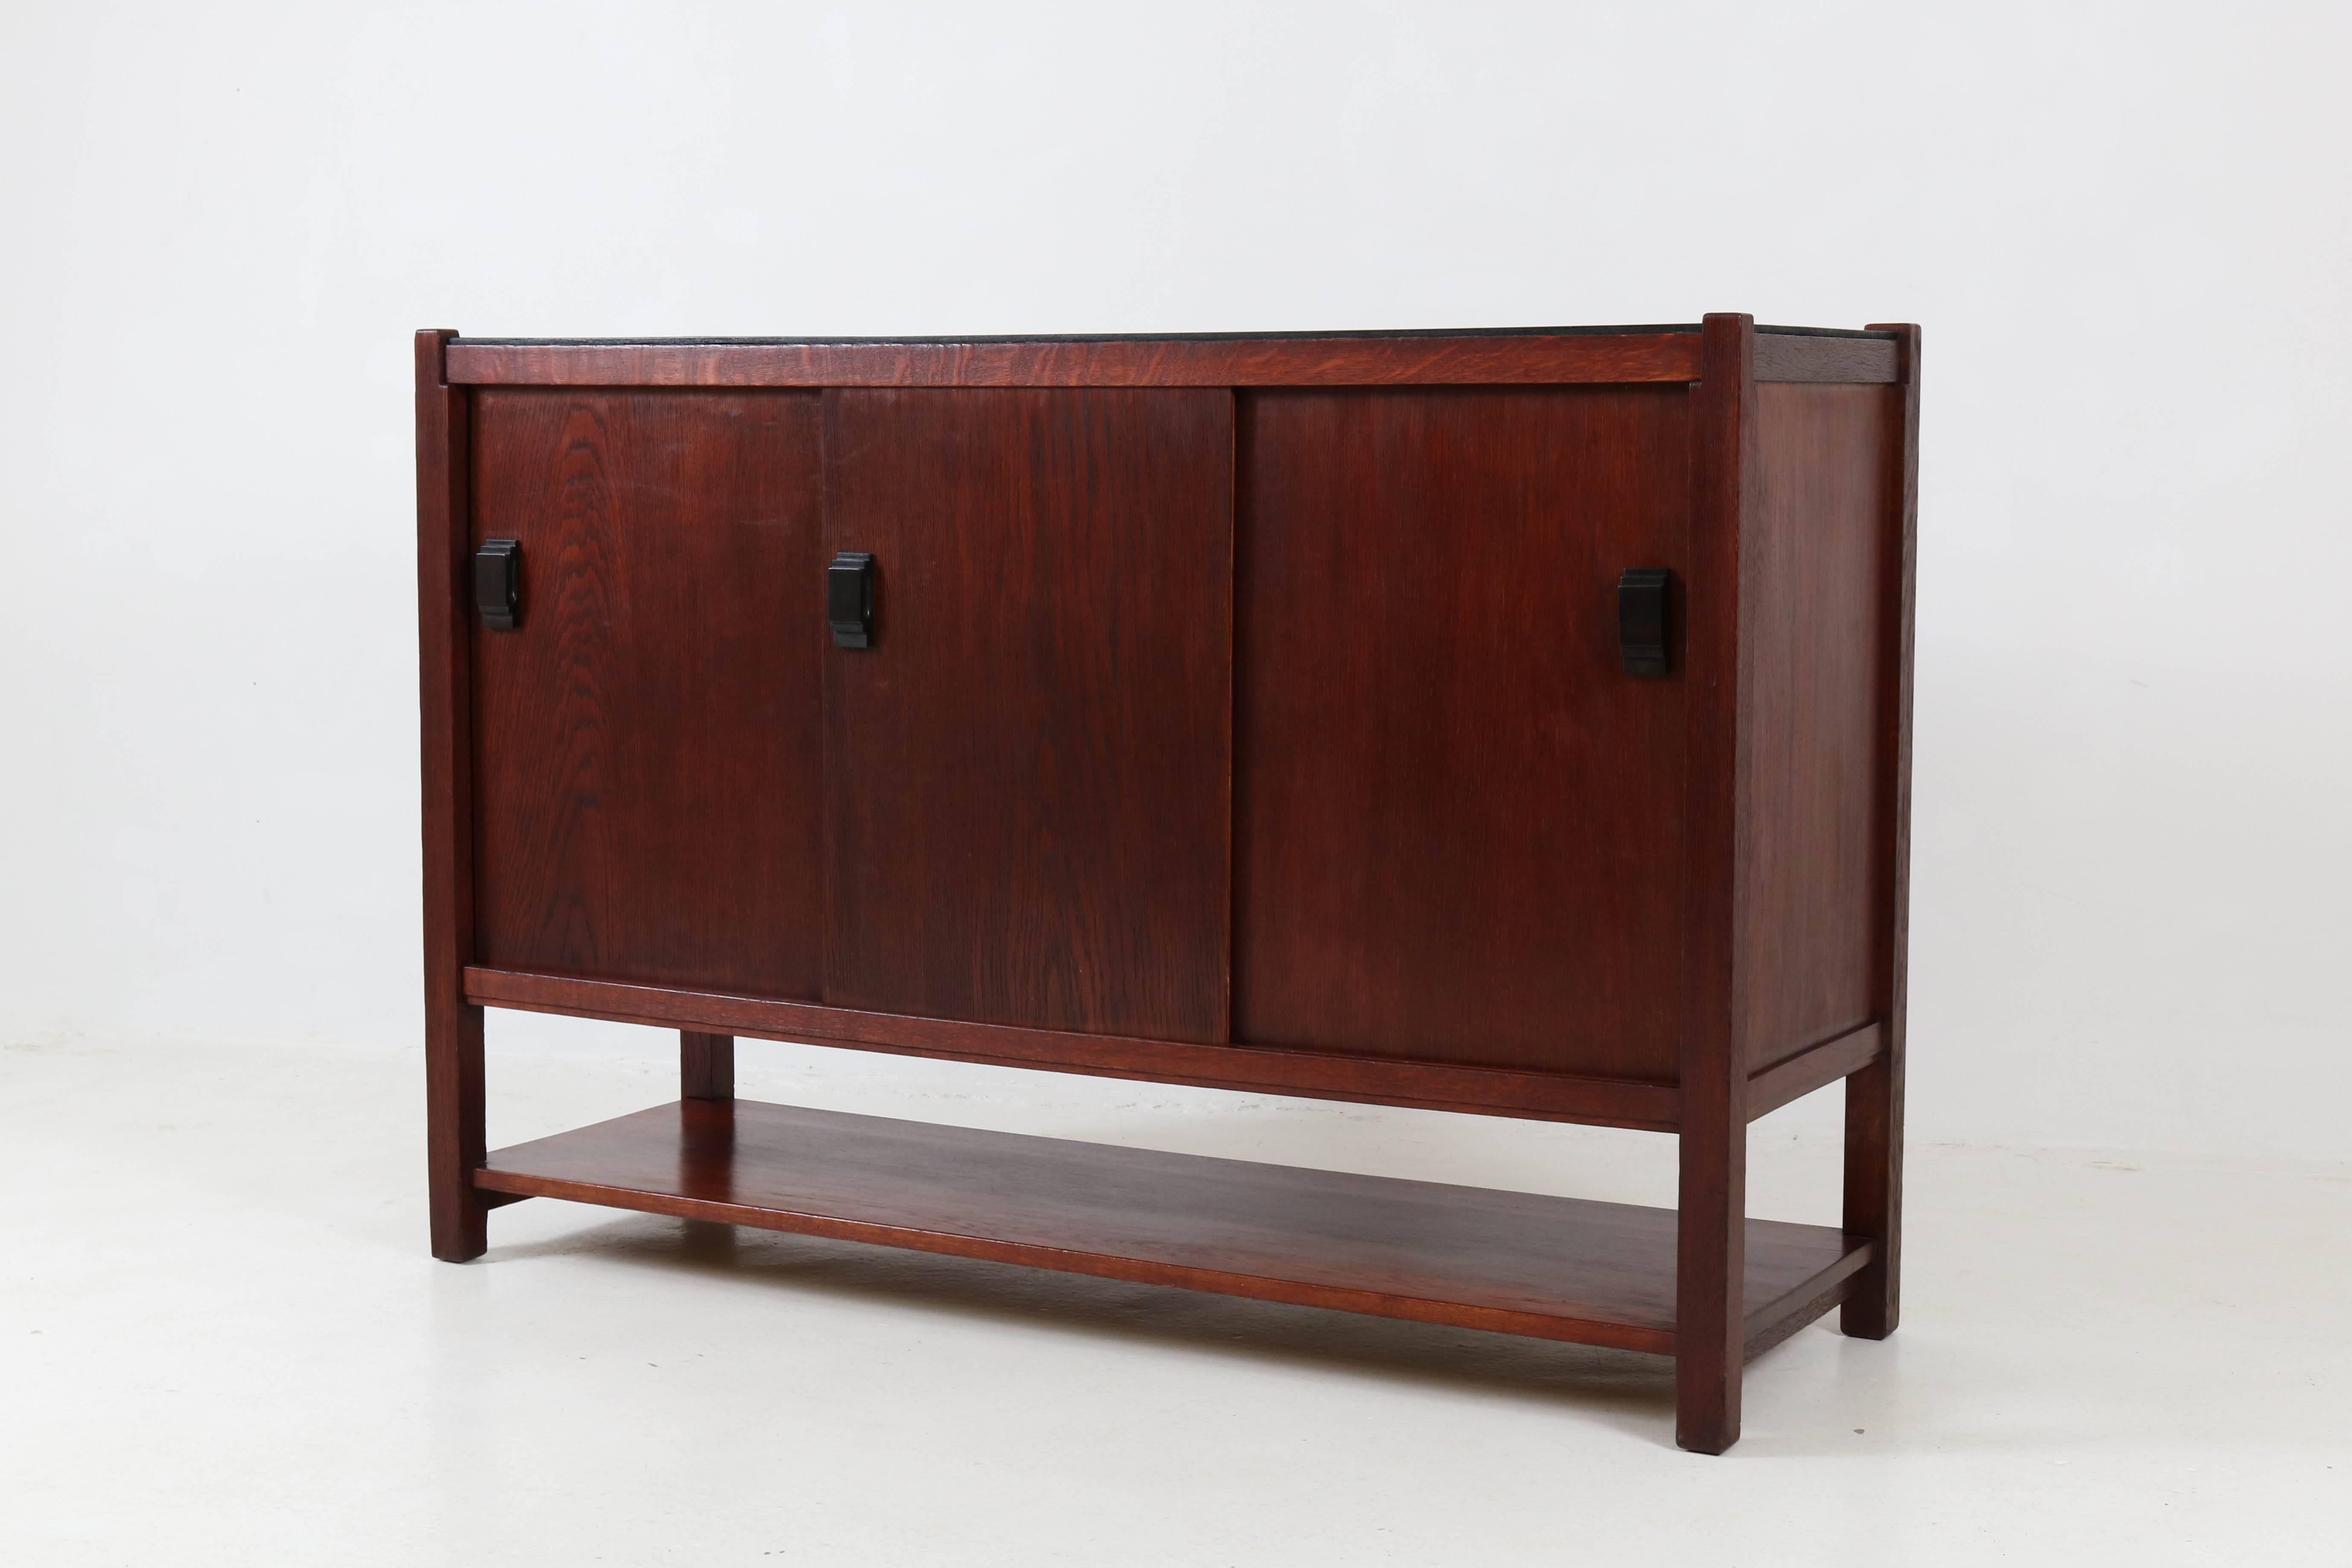 Rare Art Deco Haagse school sideboard or credenza by Frits Spanjaard for L.O.V. Oosterbeek, 1920s.
Mahogany stained solid oak with original ebonized top.
Three original Macassar ebony handles on the sliding doors.
Marked with L.O.V. tag.
In good